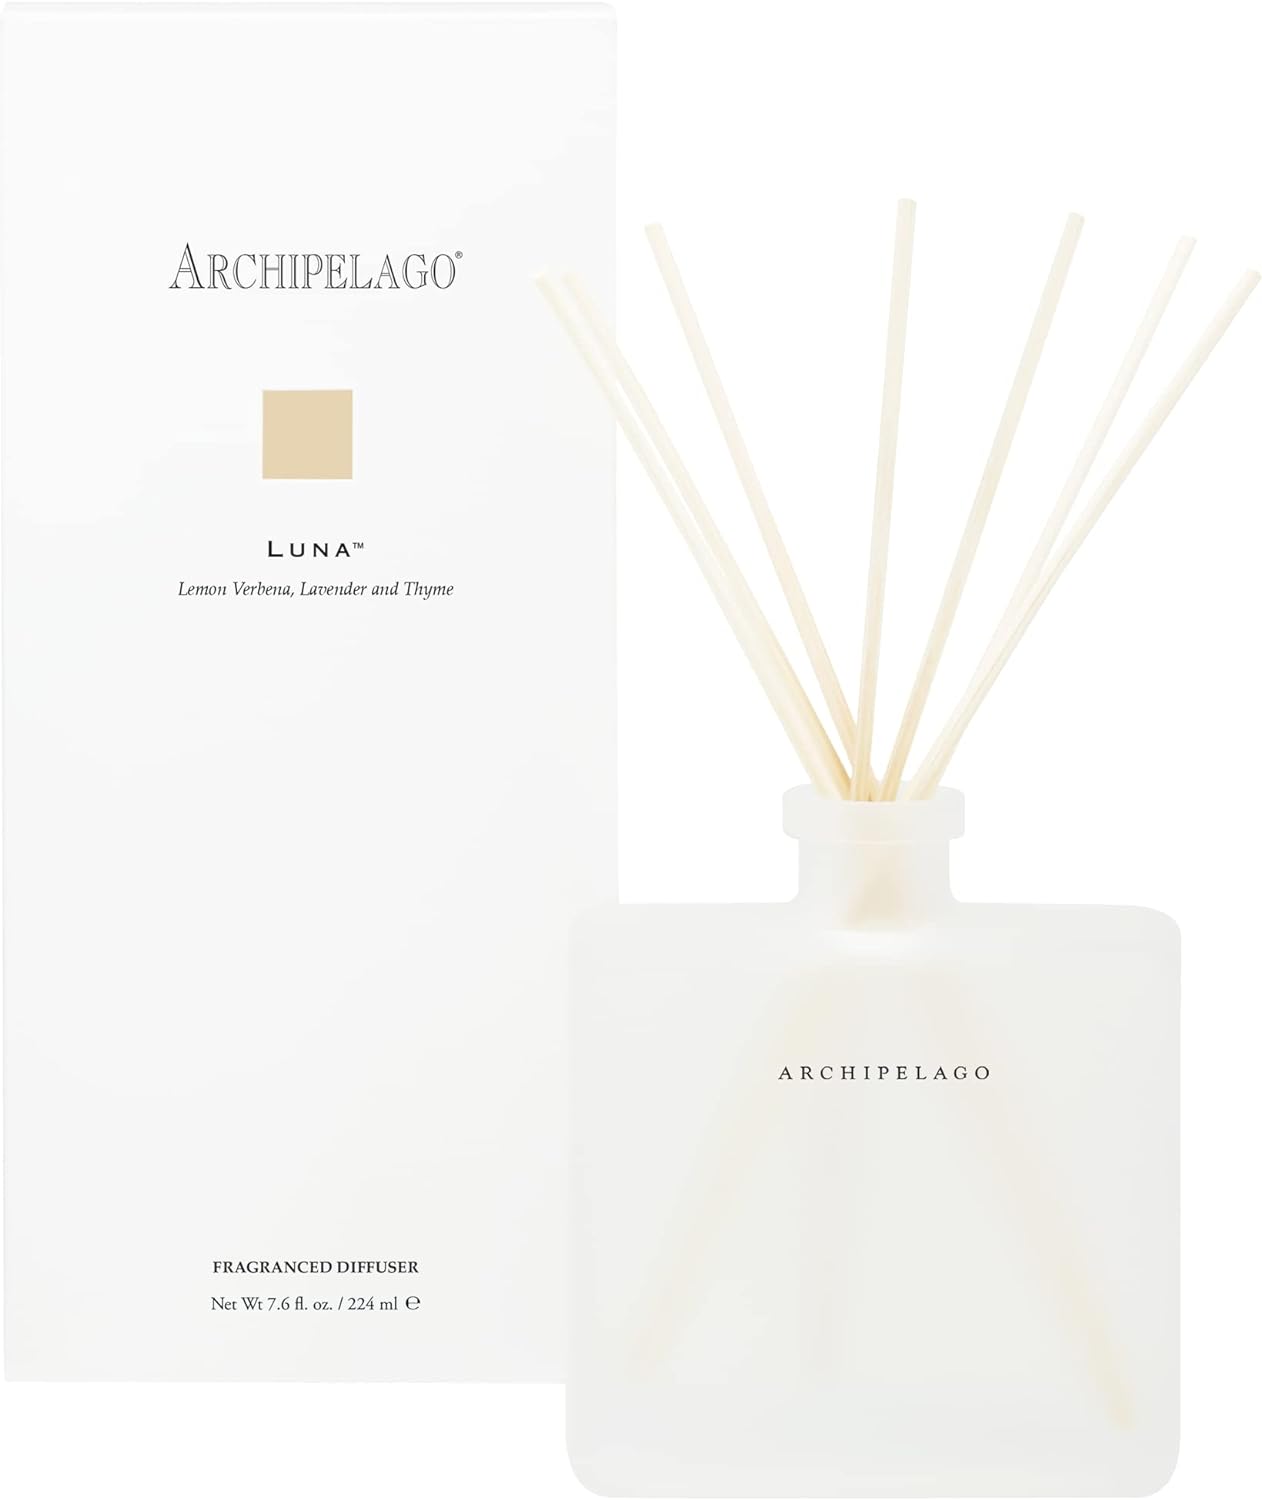 Archipelago Botanicals Luna Reed Diffuser | Includes Fragrance Oil, Frosted Glass Vessel and 10 Diffuser Reeds | Perfect for Home, Office or a Gift (7.6 fl oz)